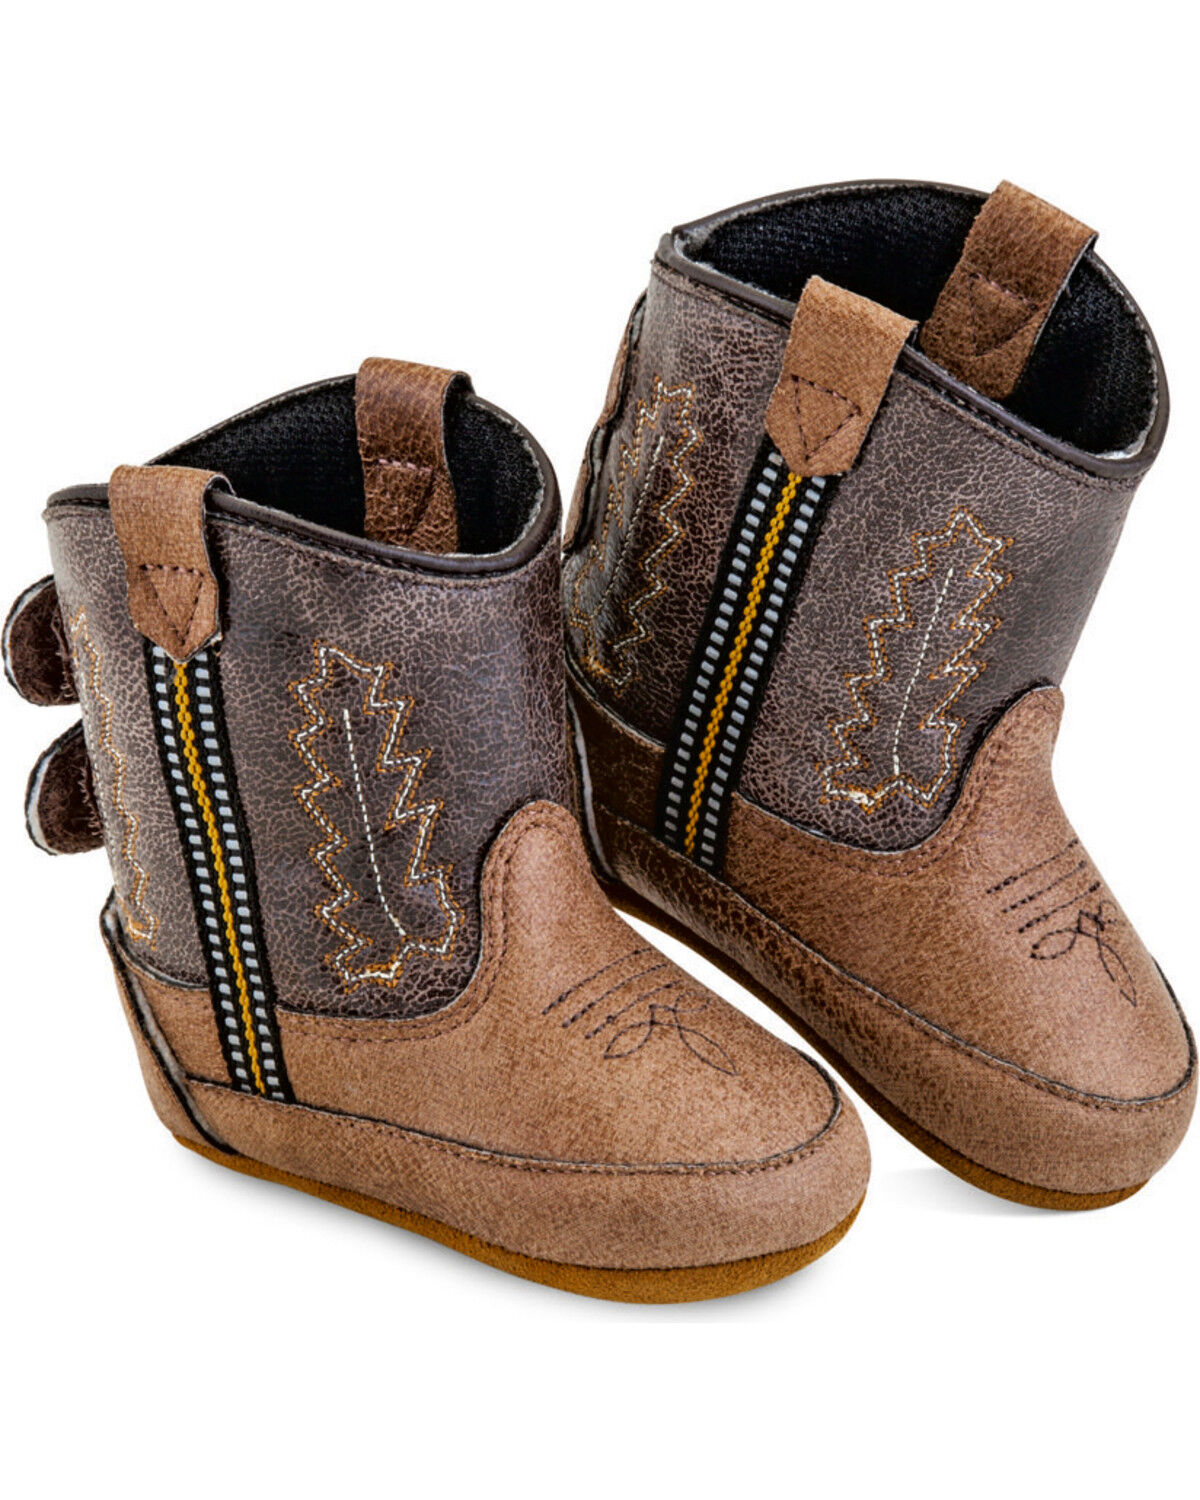 old west baby boots